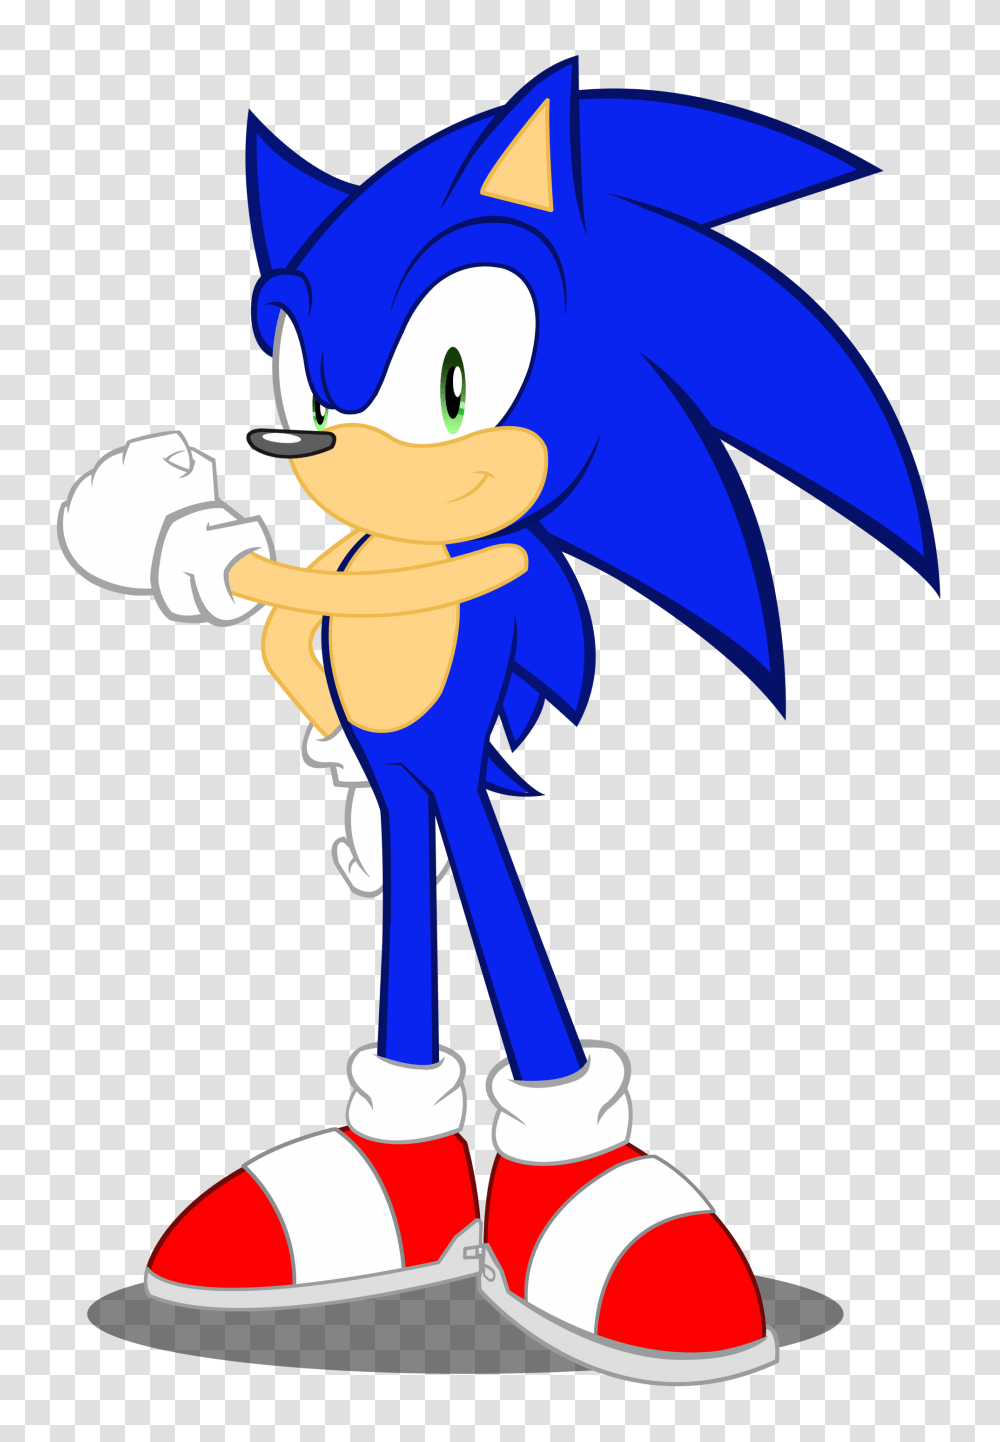 My First Design Sonic The Hedgehog In Mlp Style, Toy, Costume Transparent Png